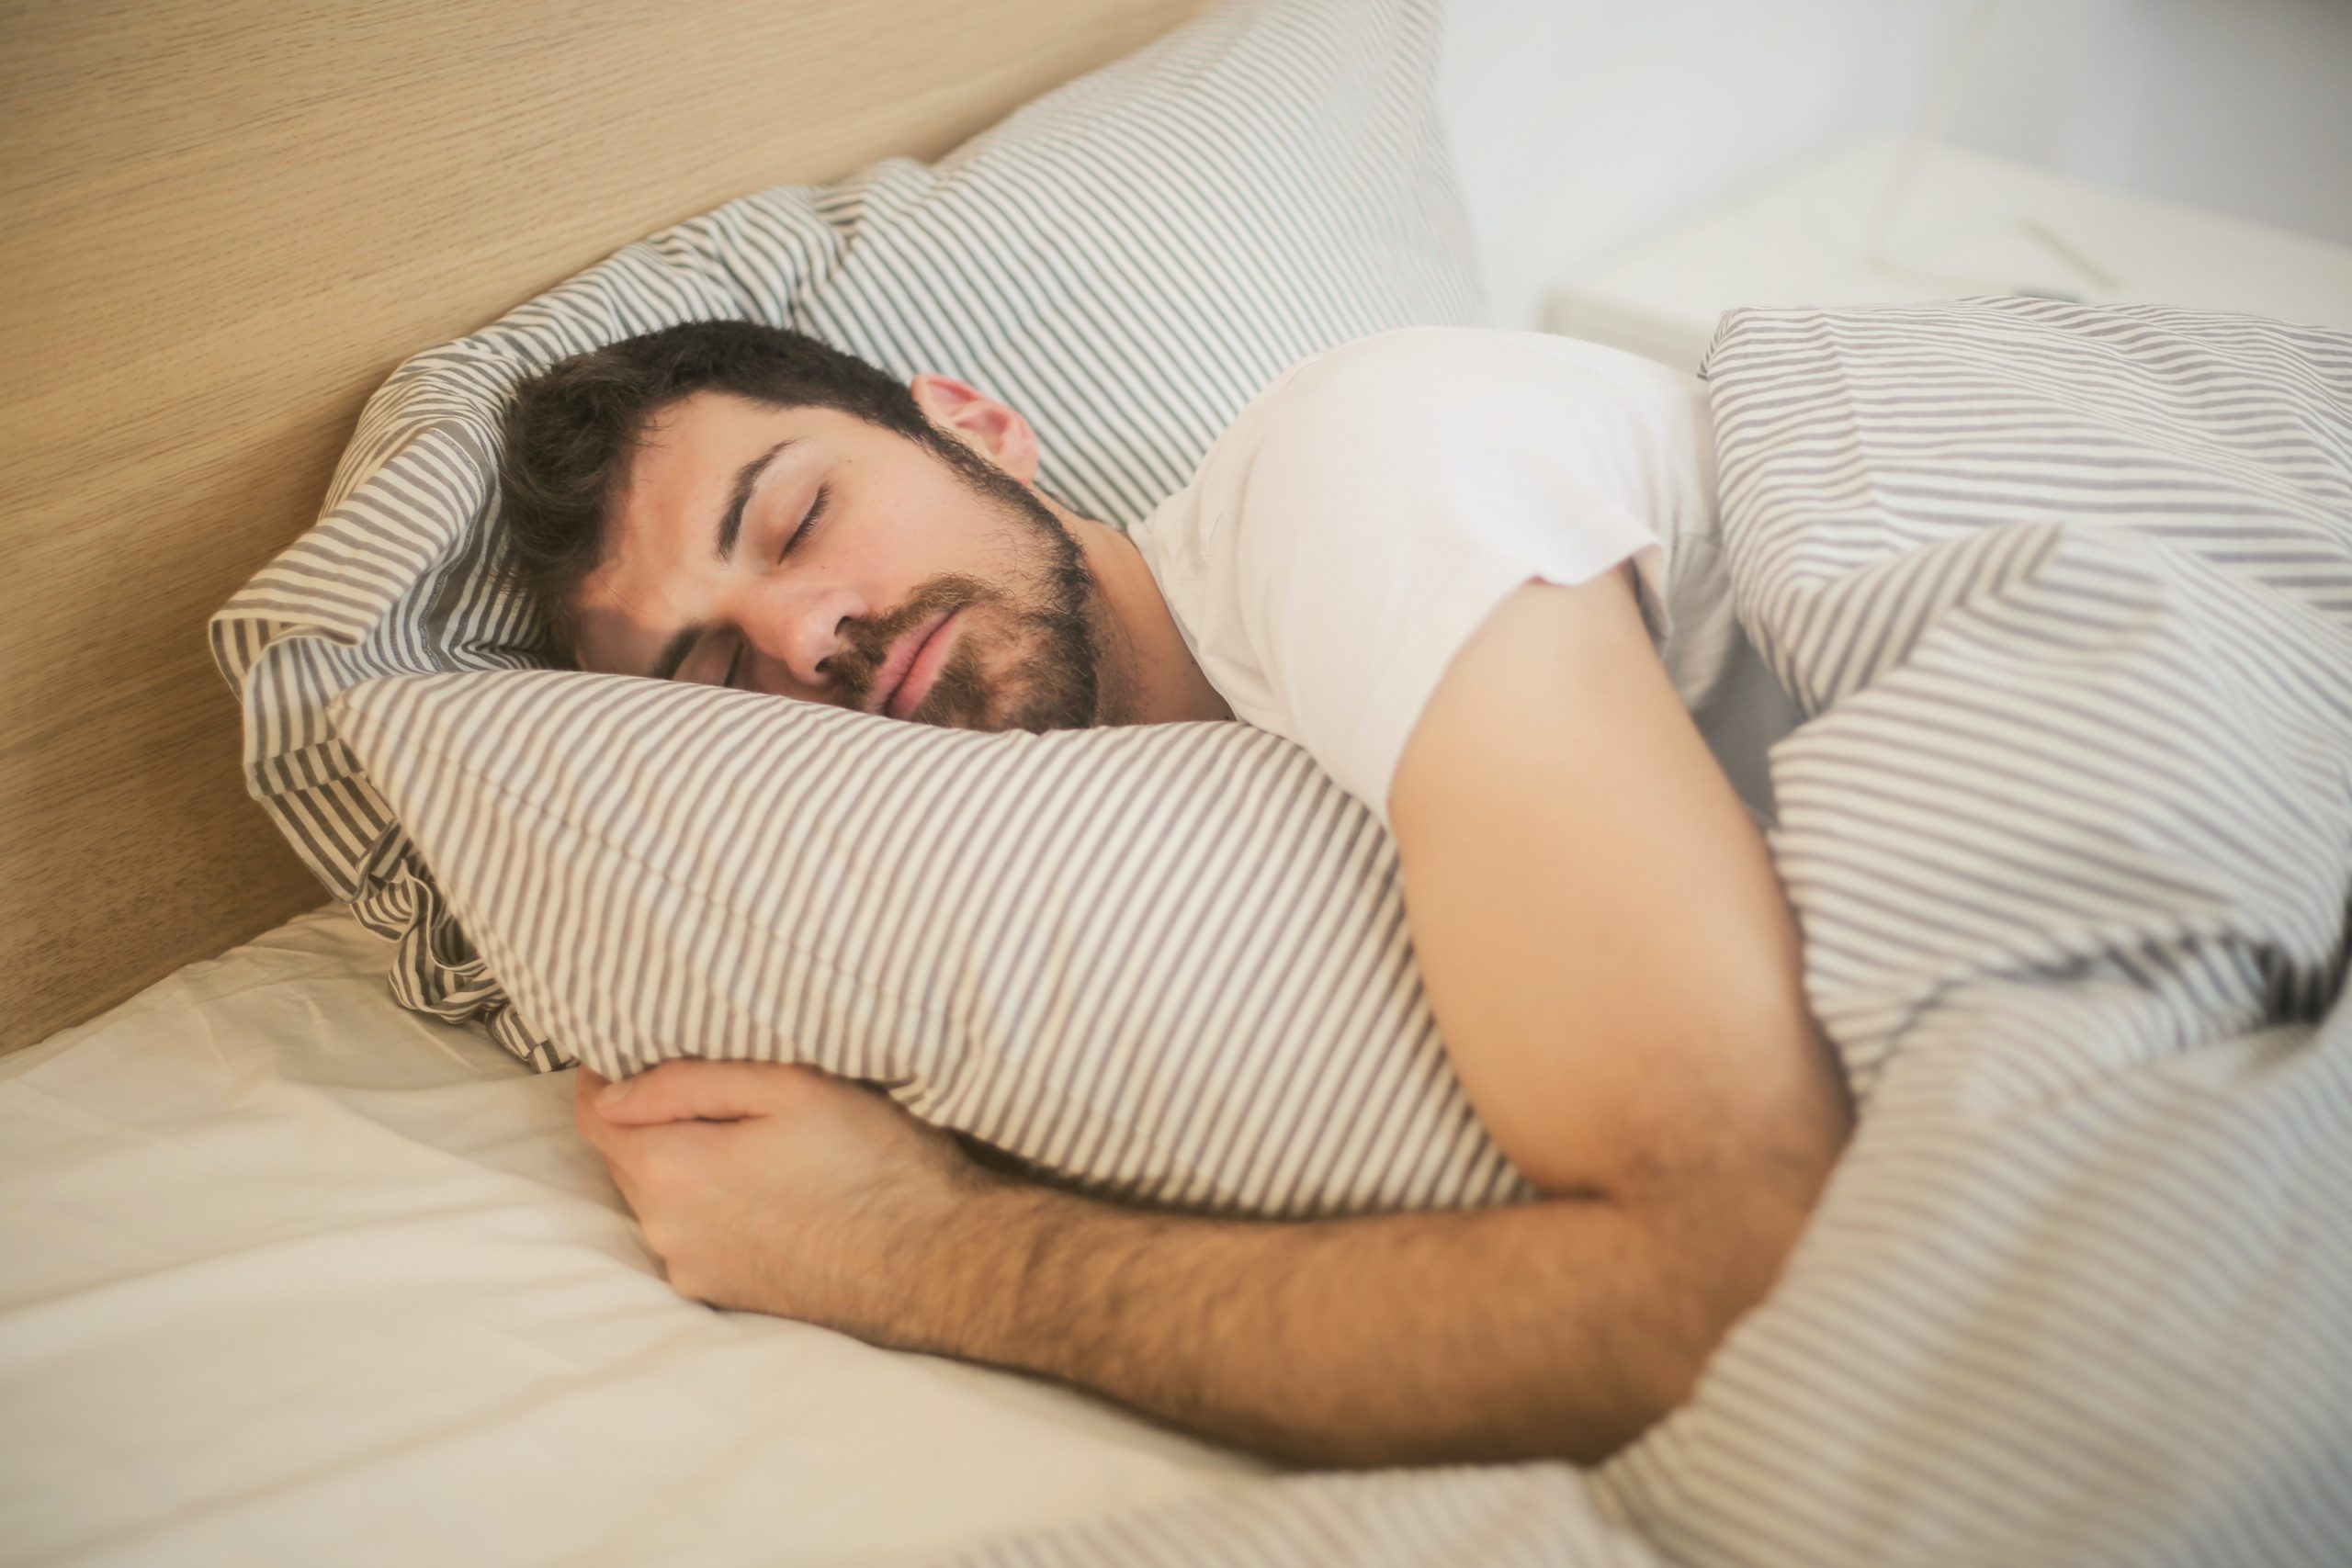 Improve Your Night Routines - Top Tips For Sleeping Better